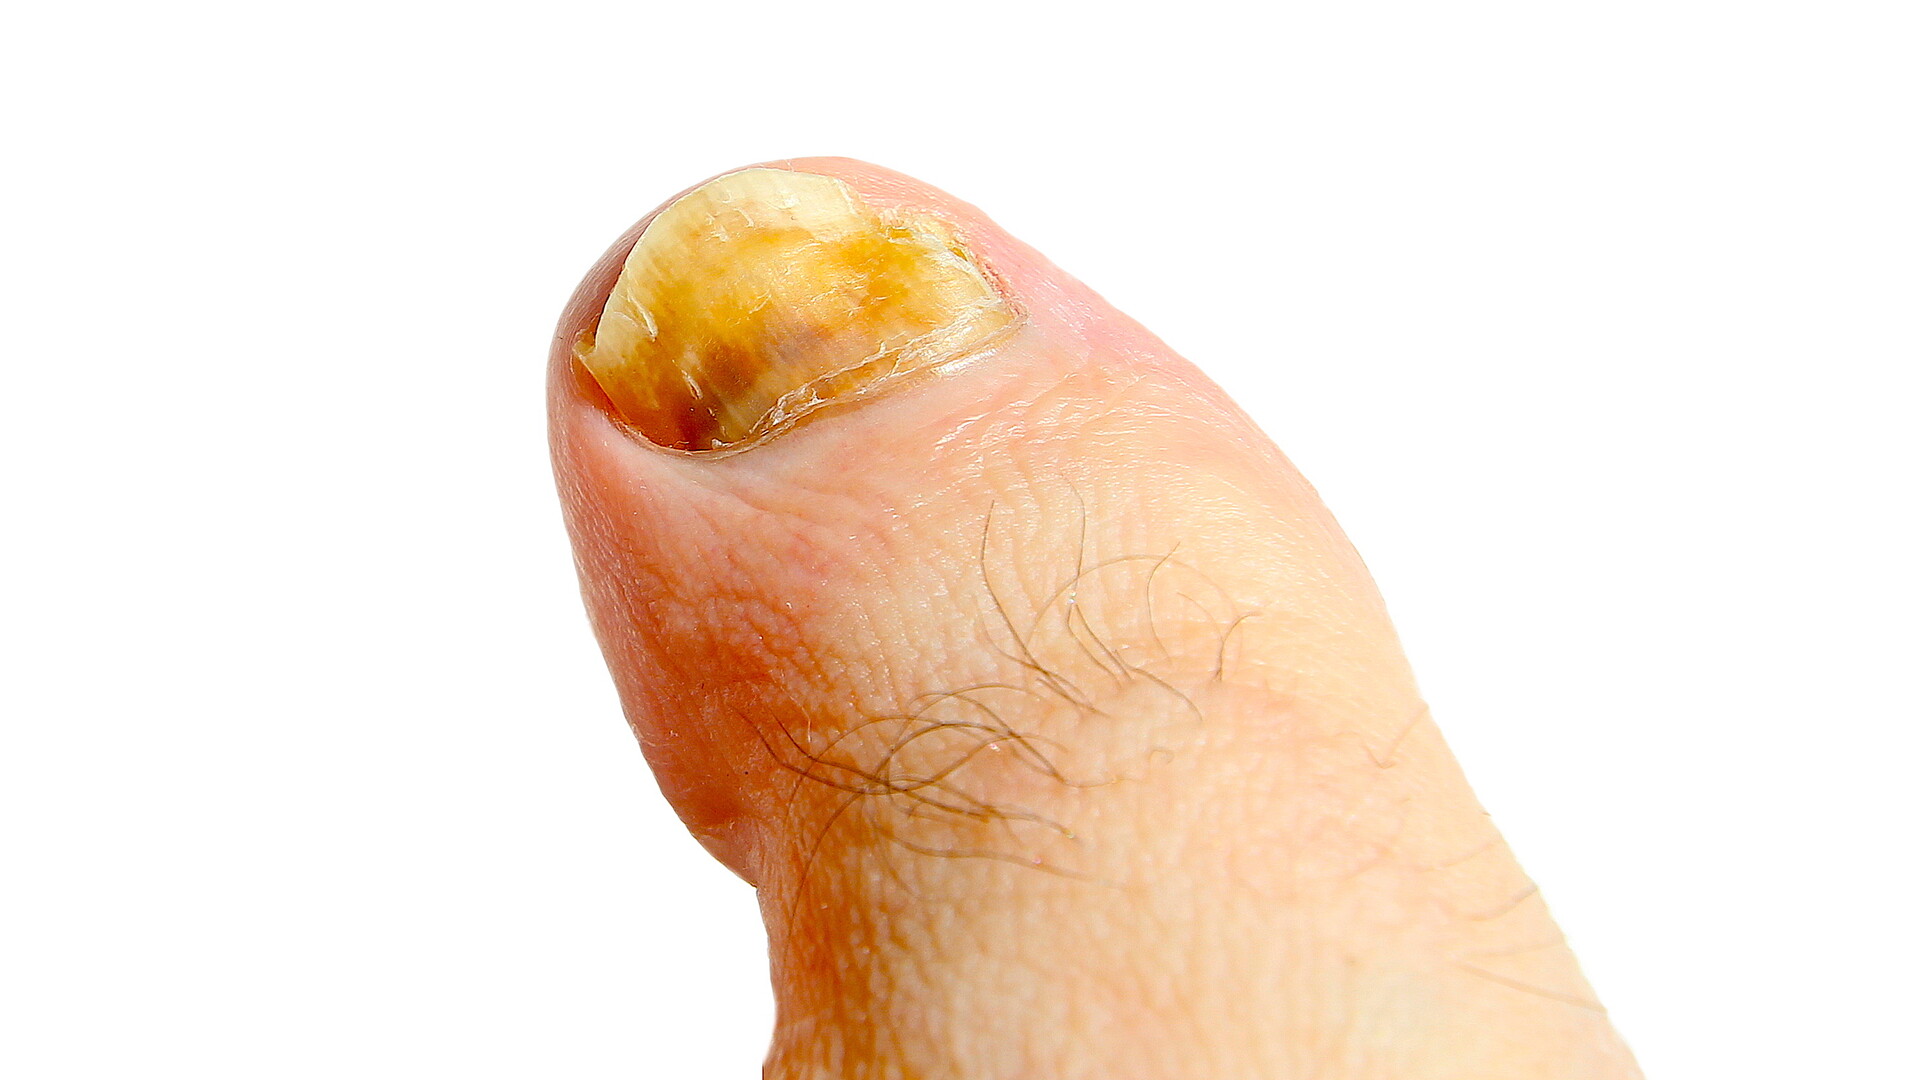 Womans Thumb Finger Of Foot Is A Wound And Bleeding On Cement Background  Close Up Shot Asian Body Skin Part Healthcare Concept Stock Photo -  Download Image Now - iStock